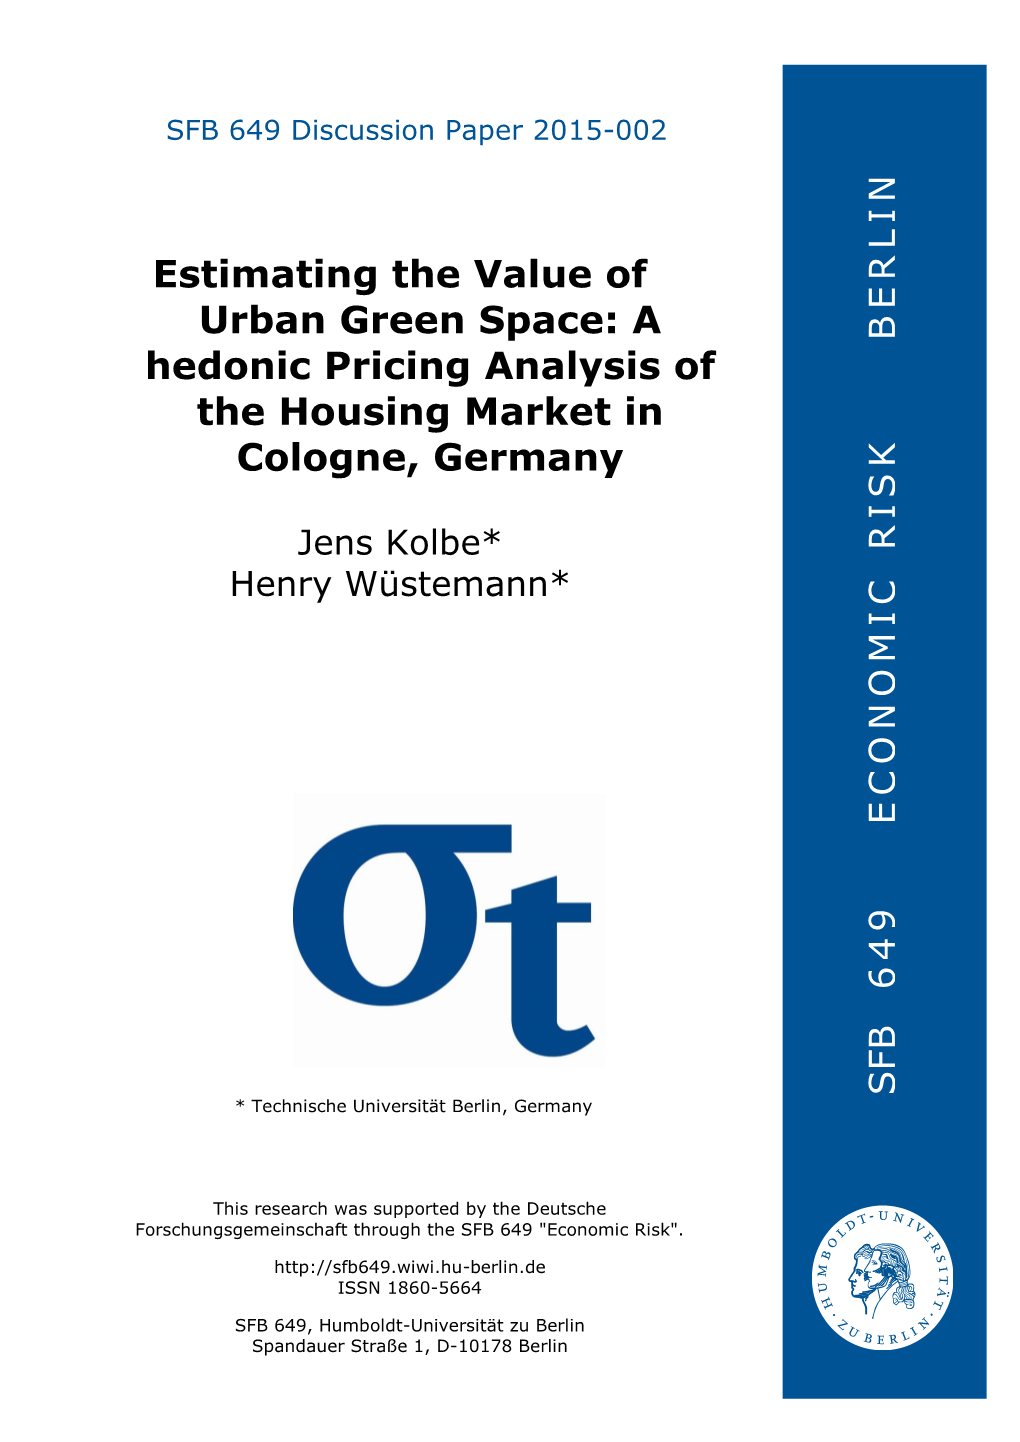 Estimating the Value of Urban Green Space: a Hedonic Pricing Analysis of the Housing Market in Cologne, Germany